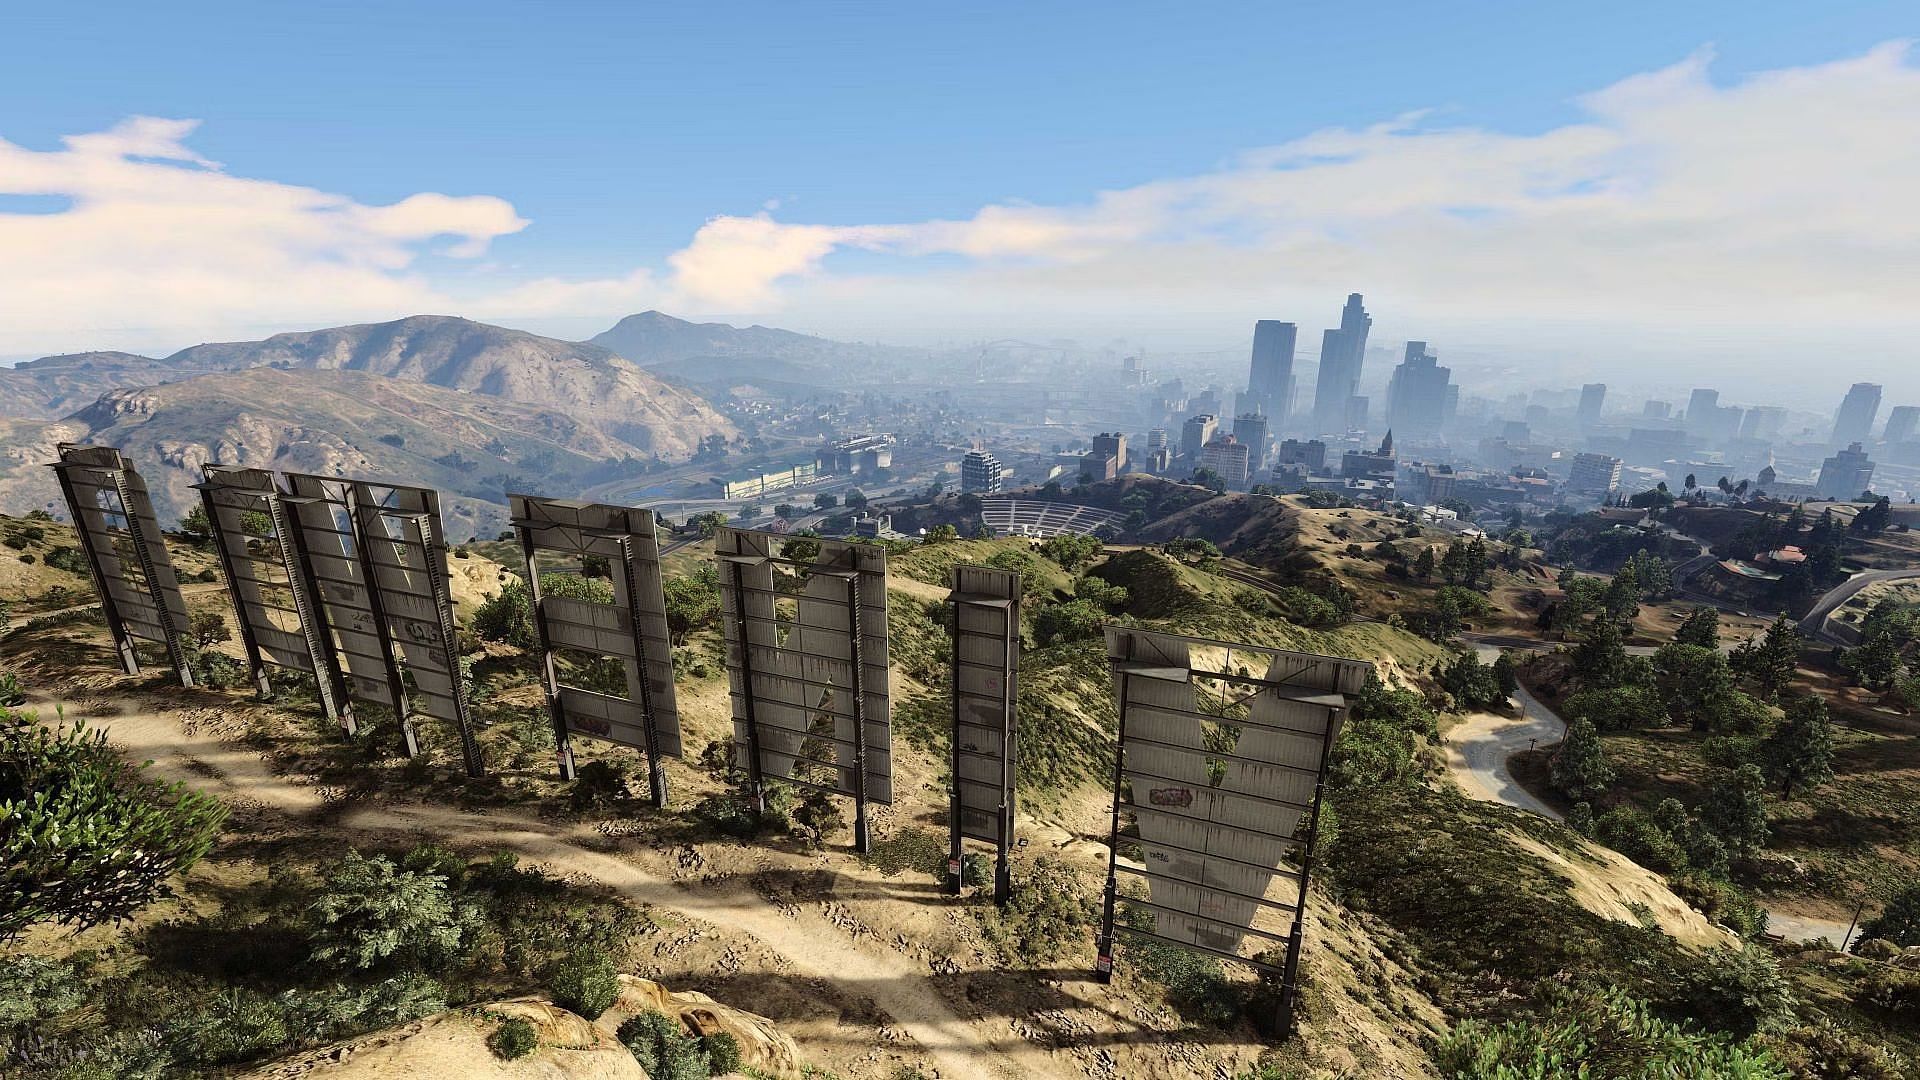 GTA 5 PS4 release will not be available at launch